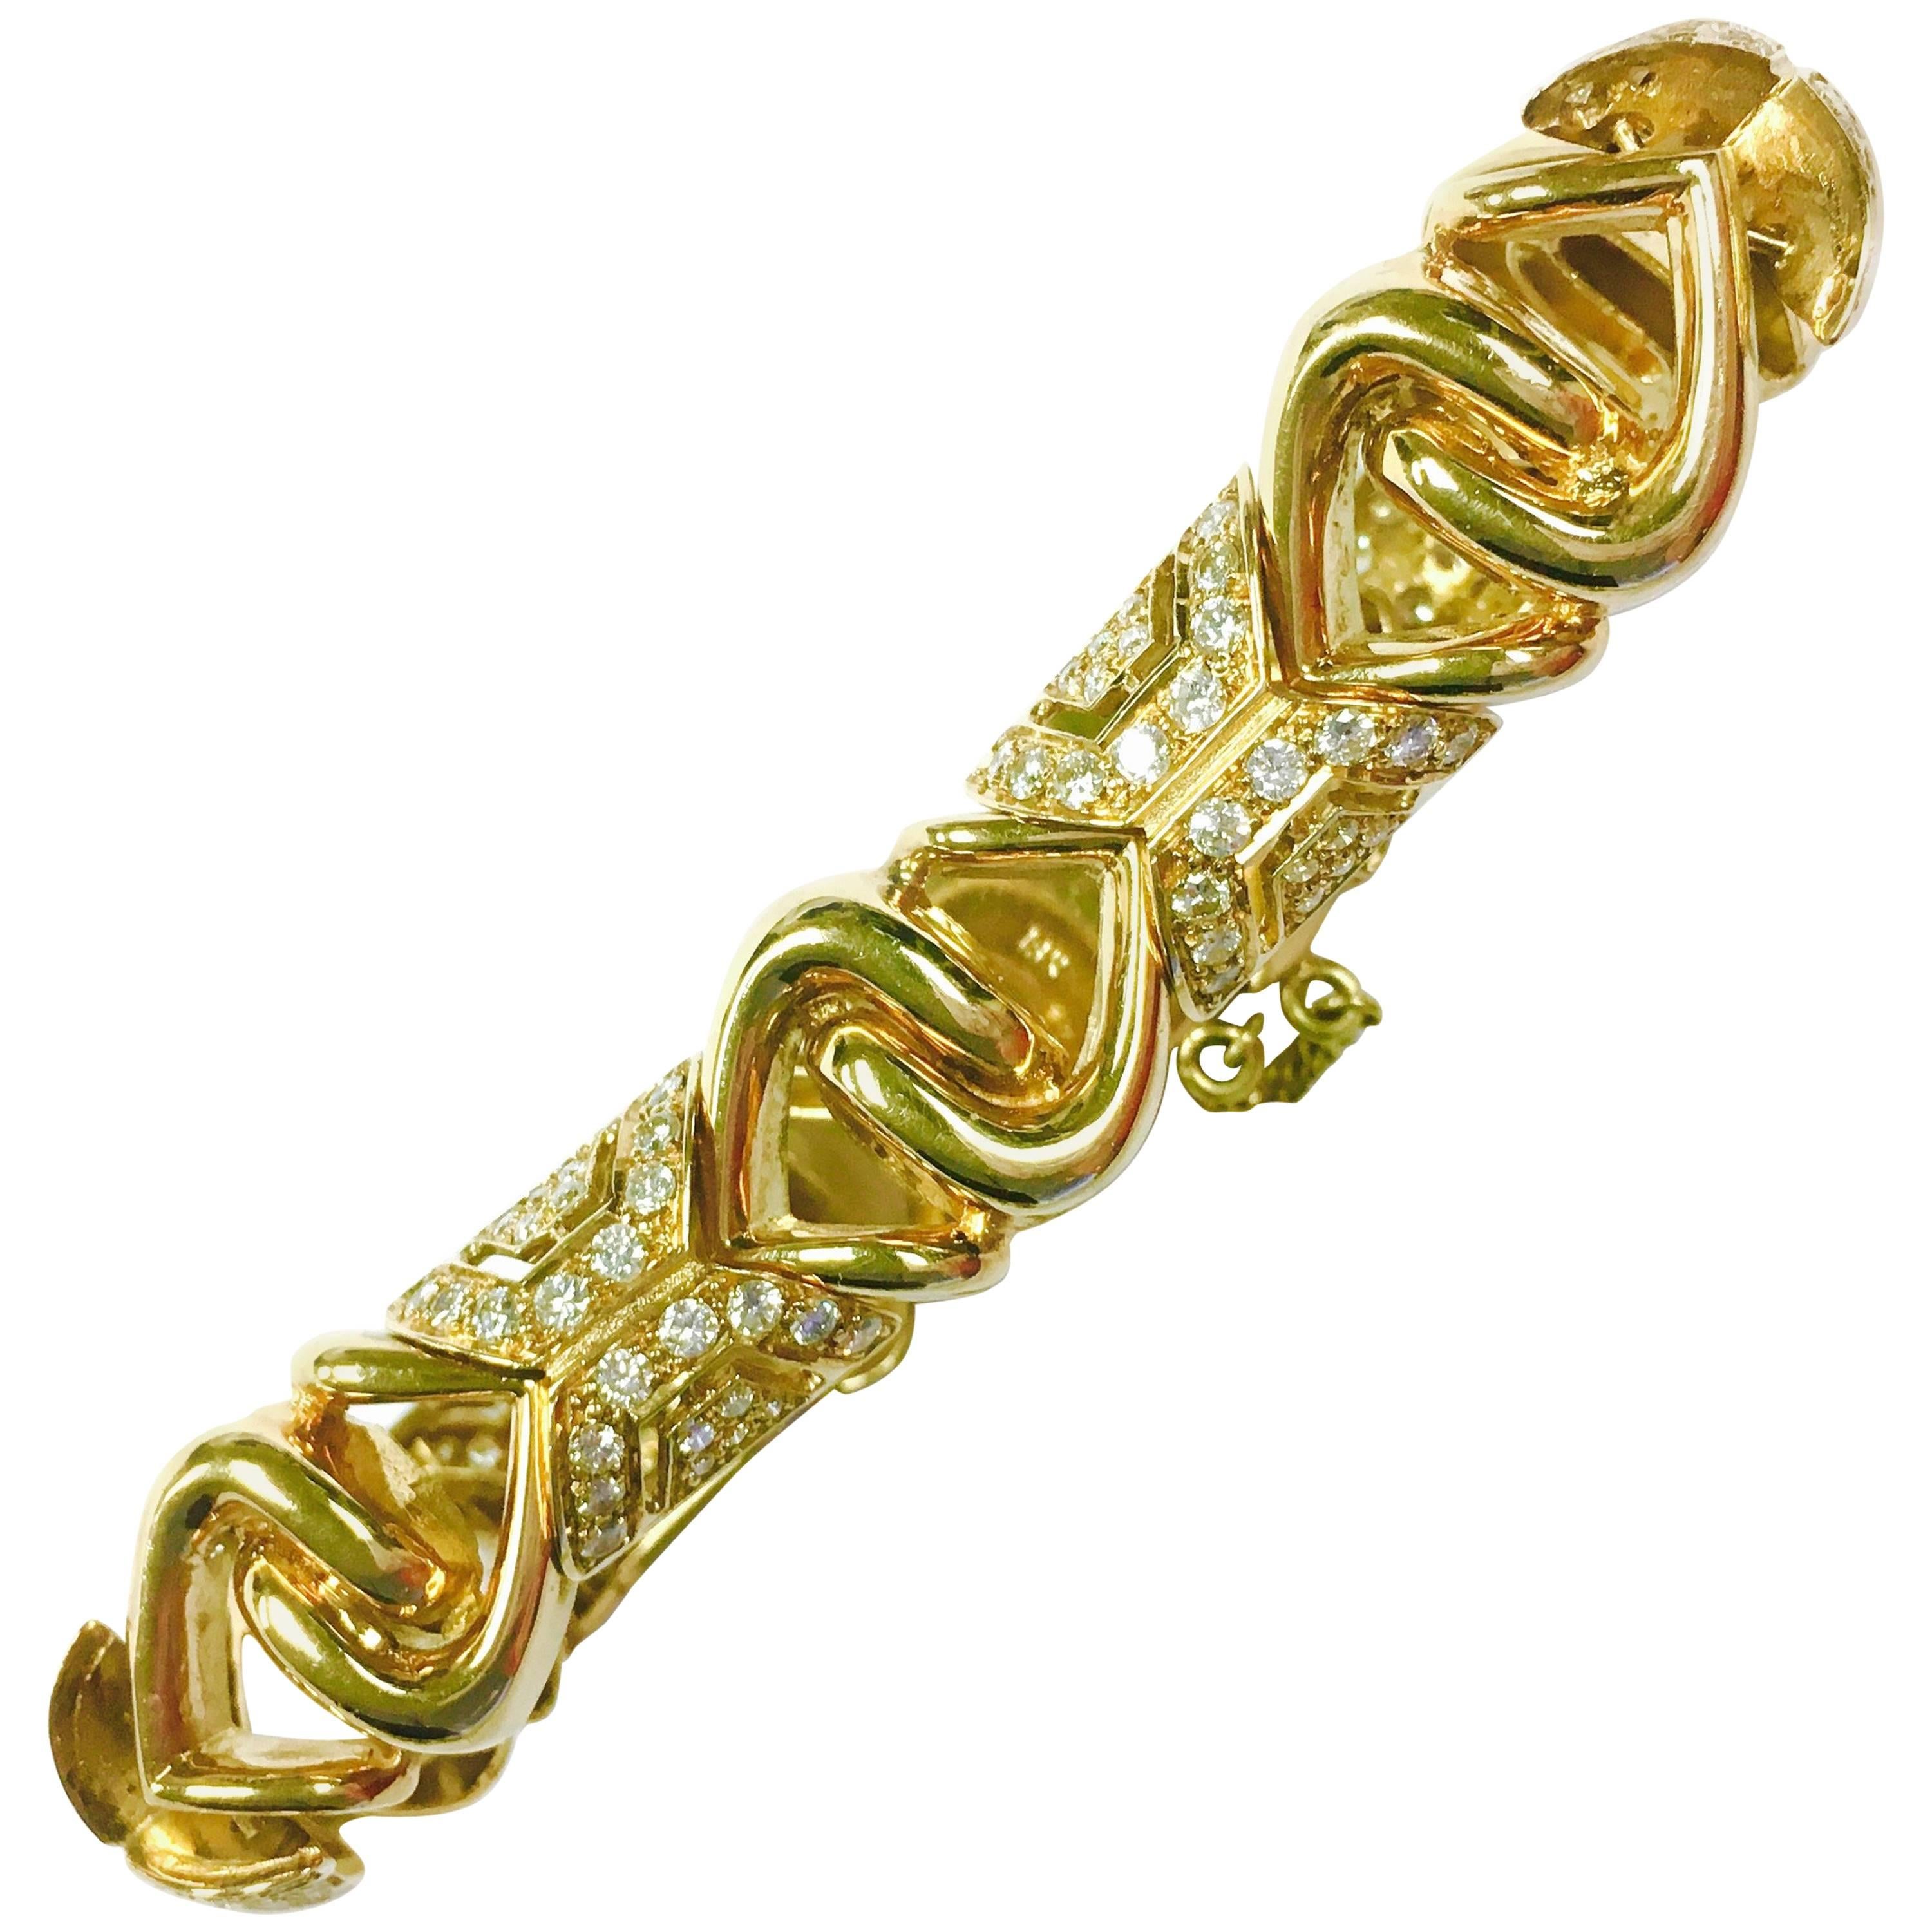 Crafted in 18K yellow gold, set with 5.0 carats of round brilliant cut diamonds. 
Color: F-G, Clarity: VS-1 to SI-1
7.25" length terminating in a hidden clasp with safet chain.
Weight: 49.4 grams